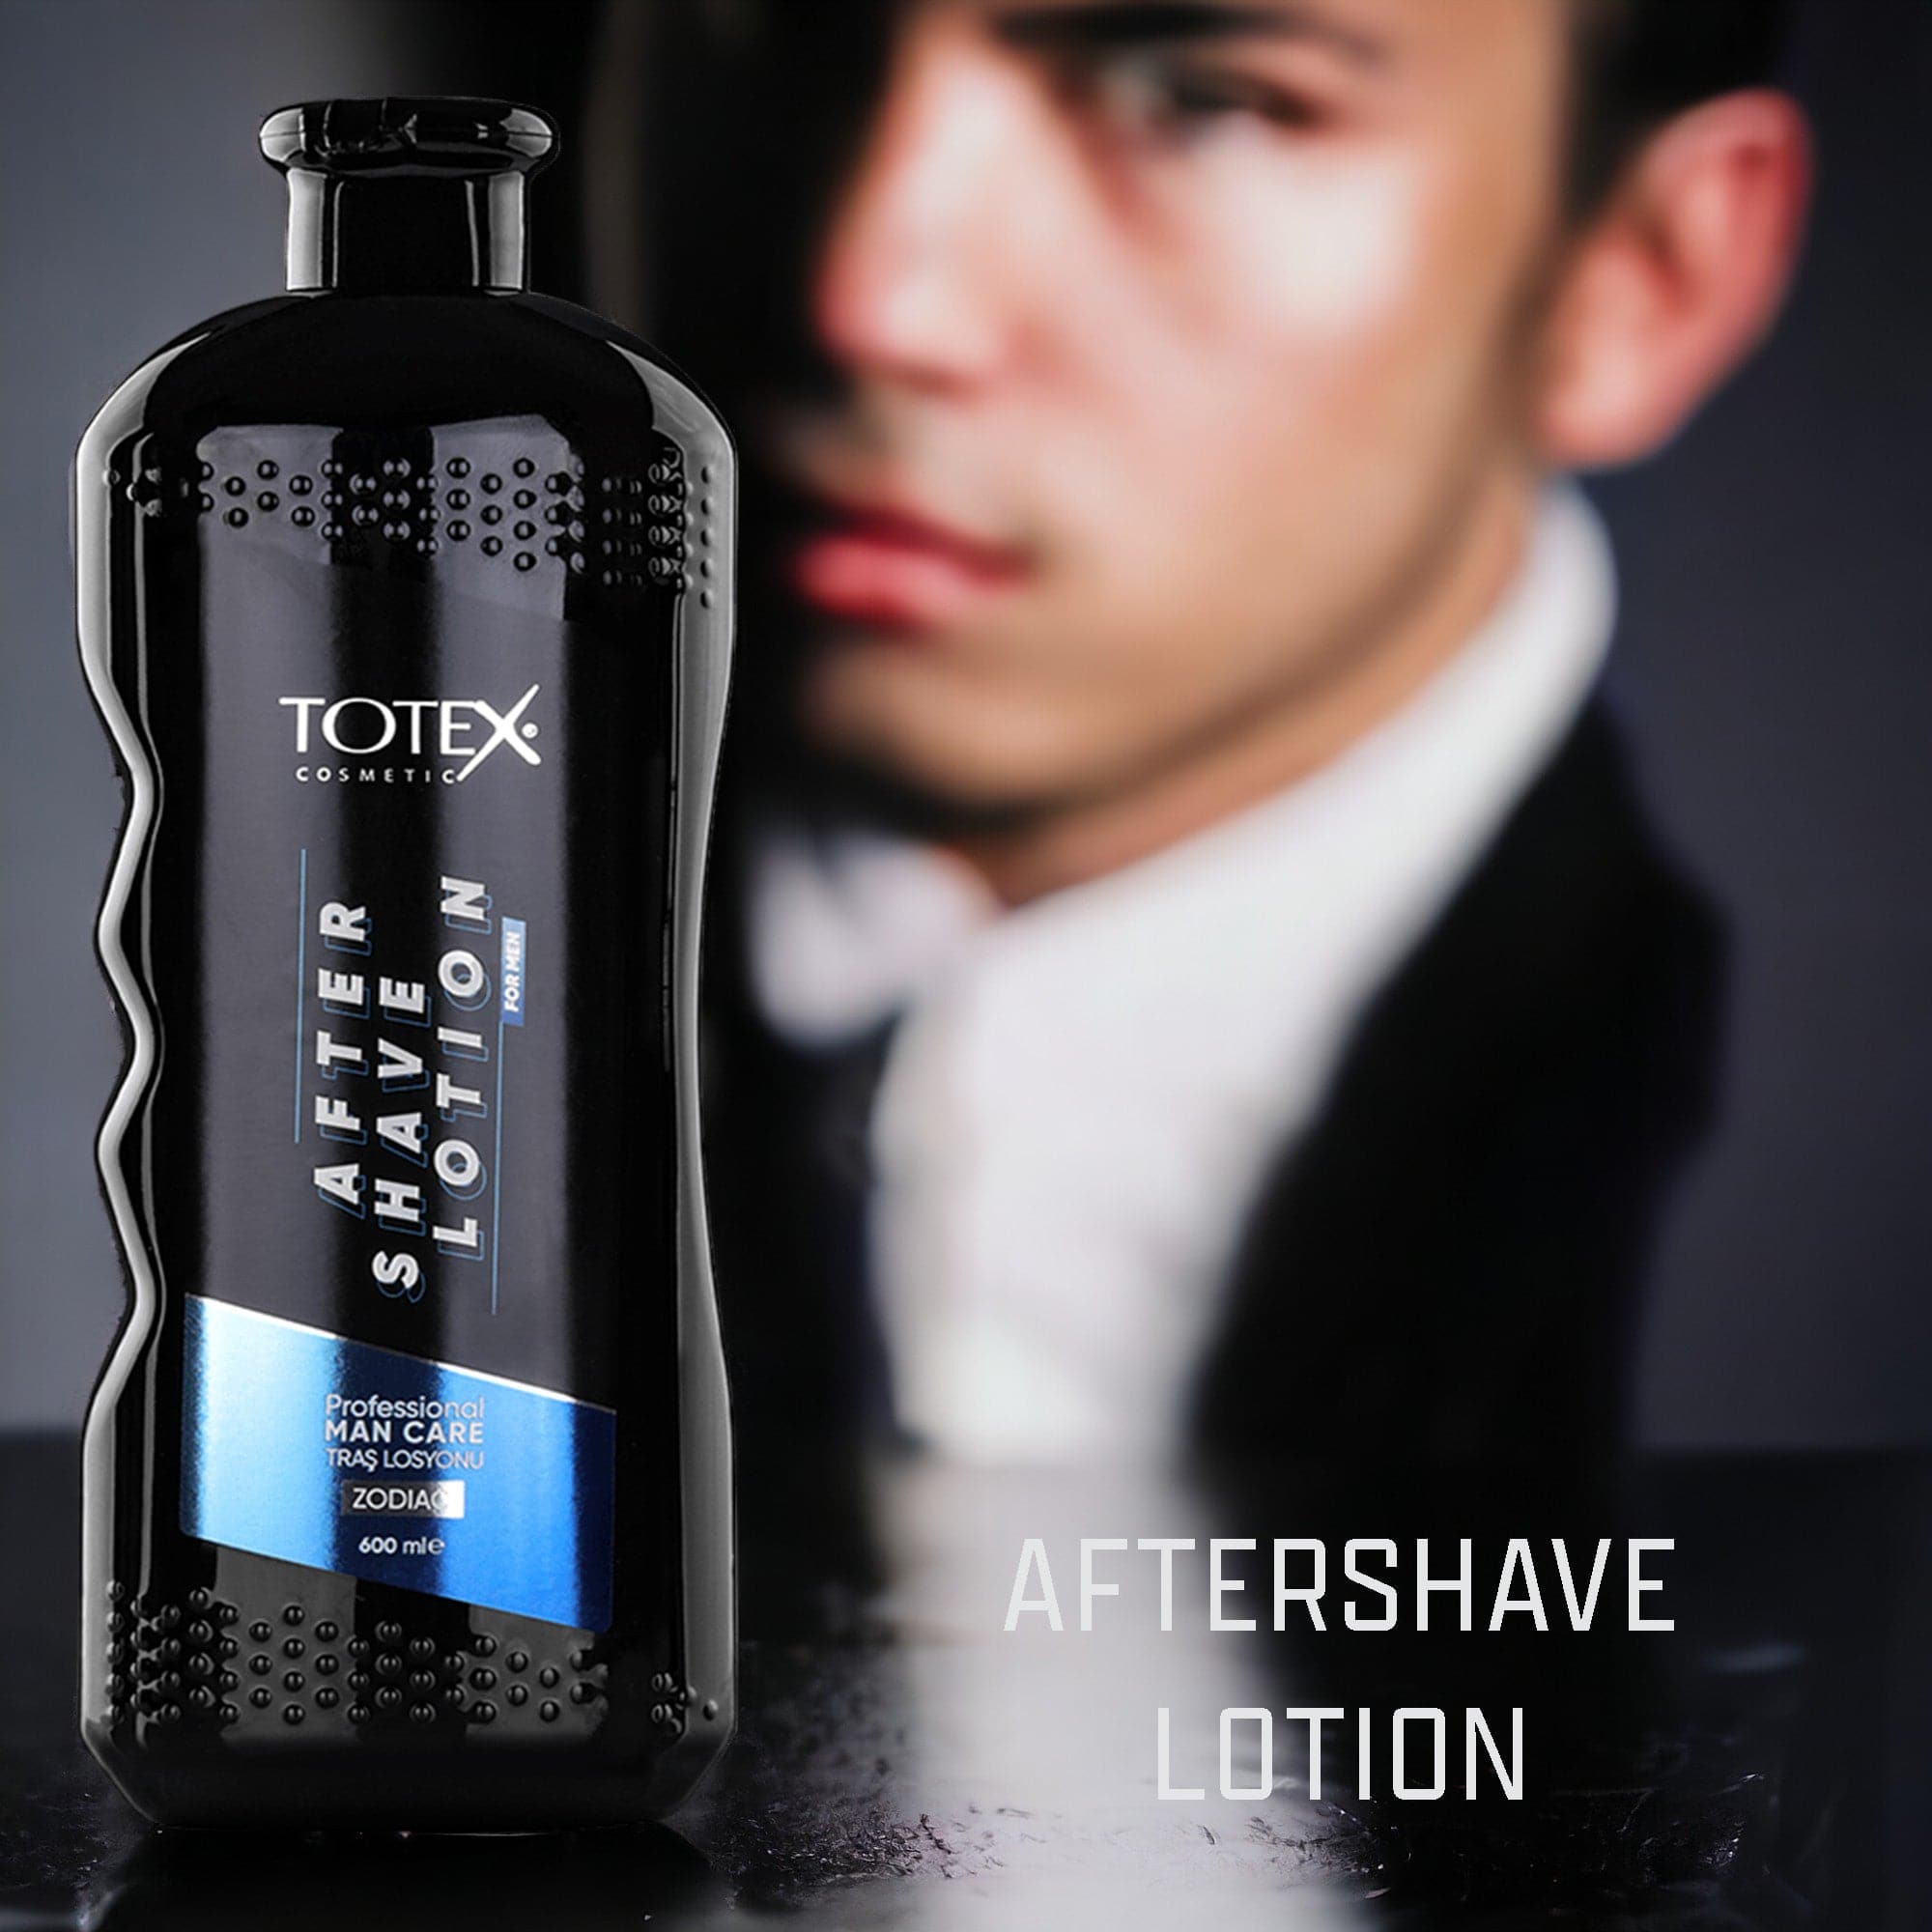 Totex - After Shave Lotion Zodiac 600ml